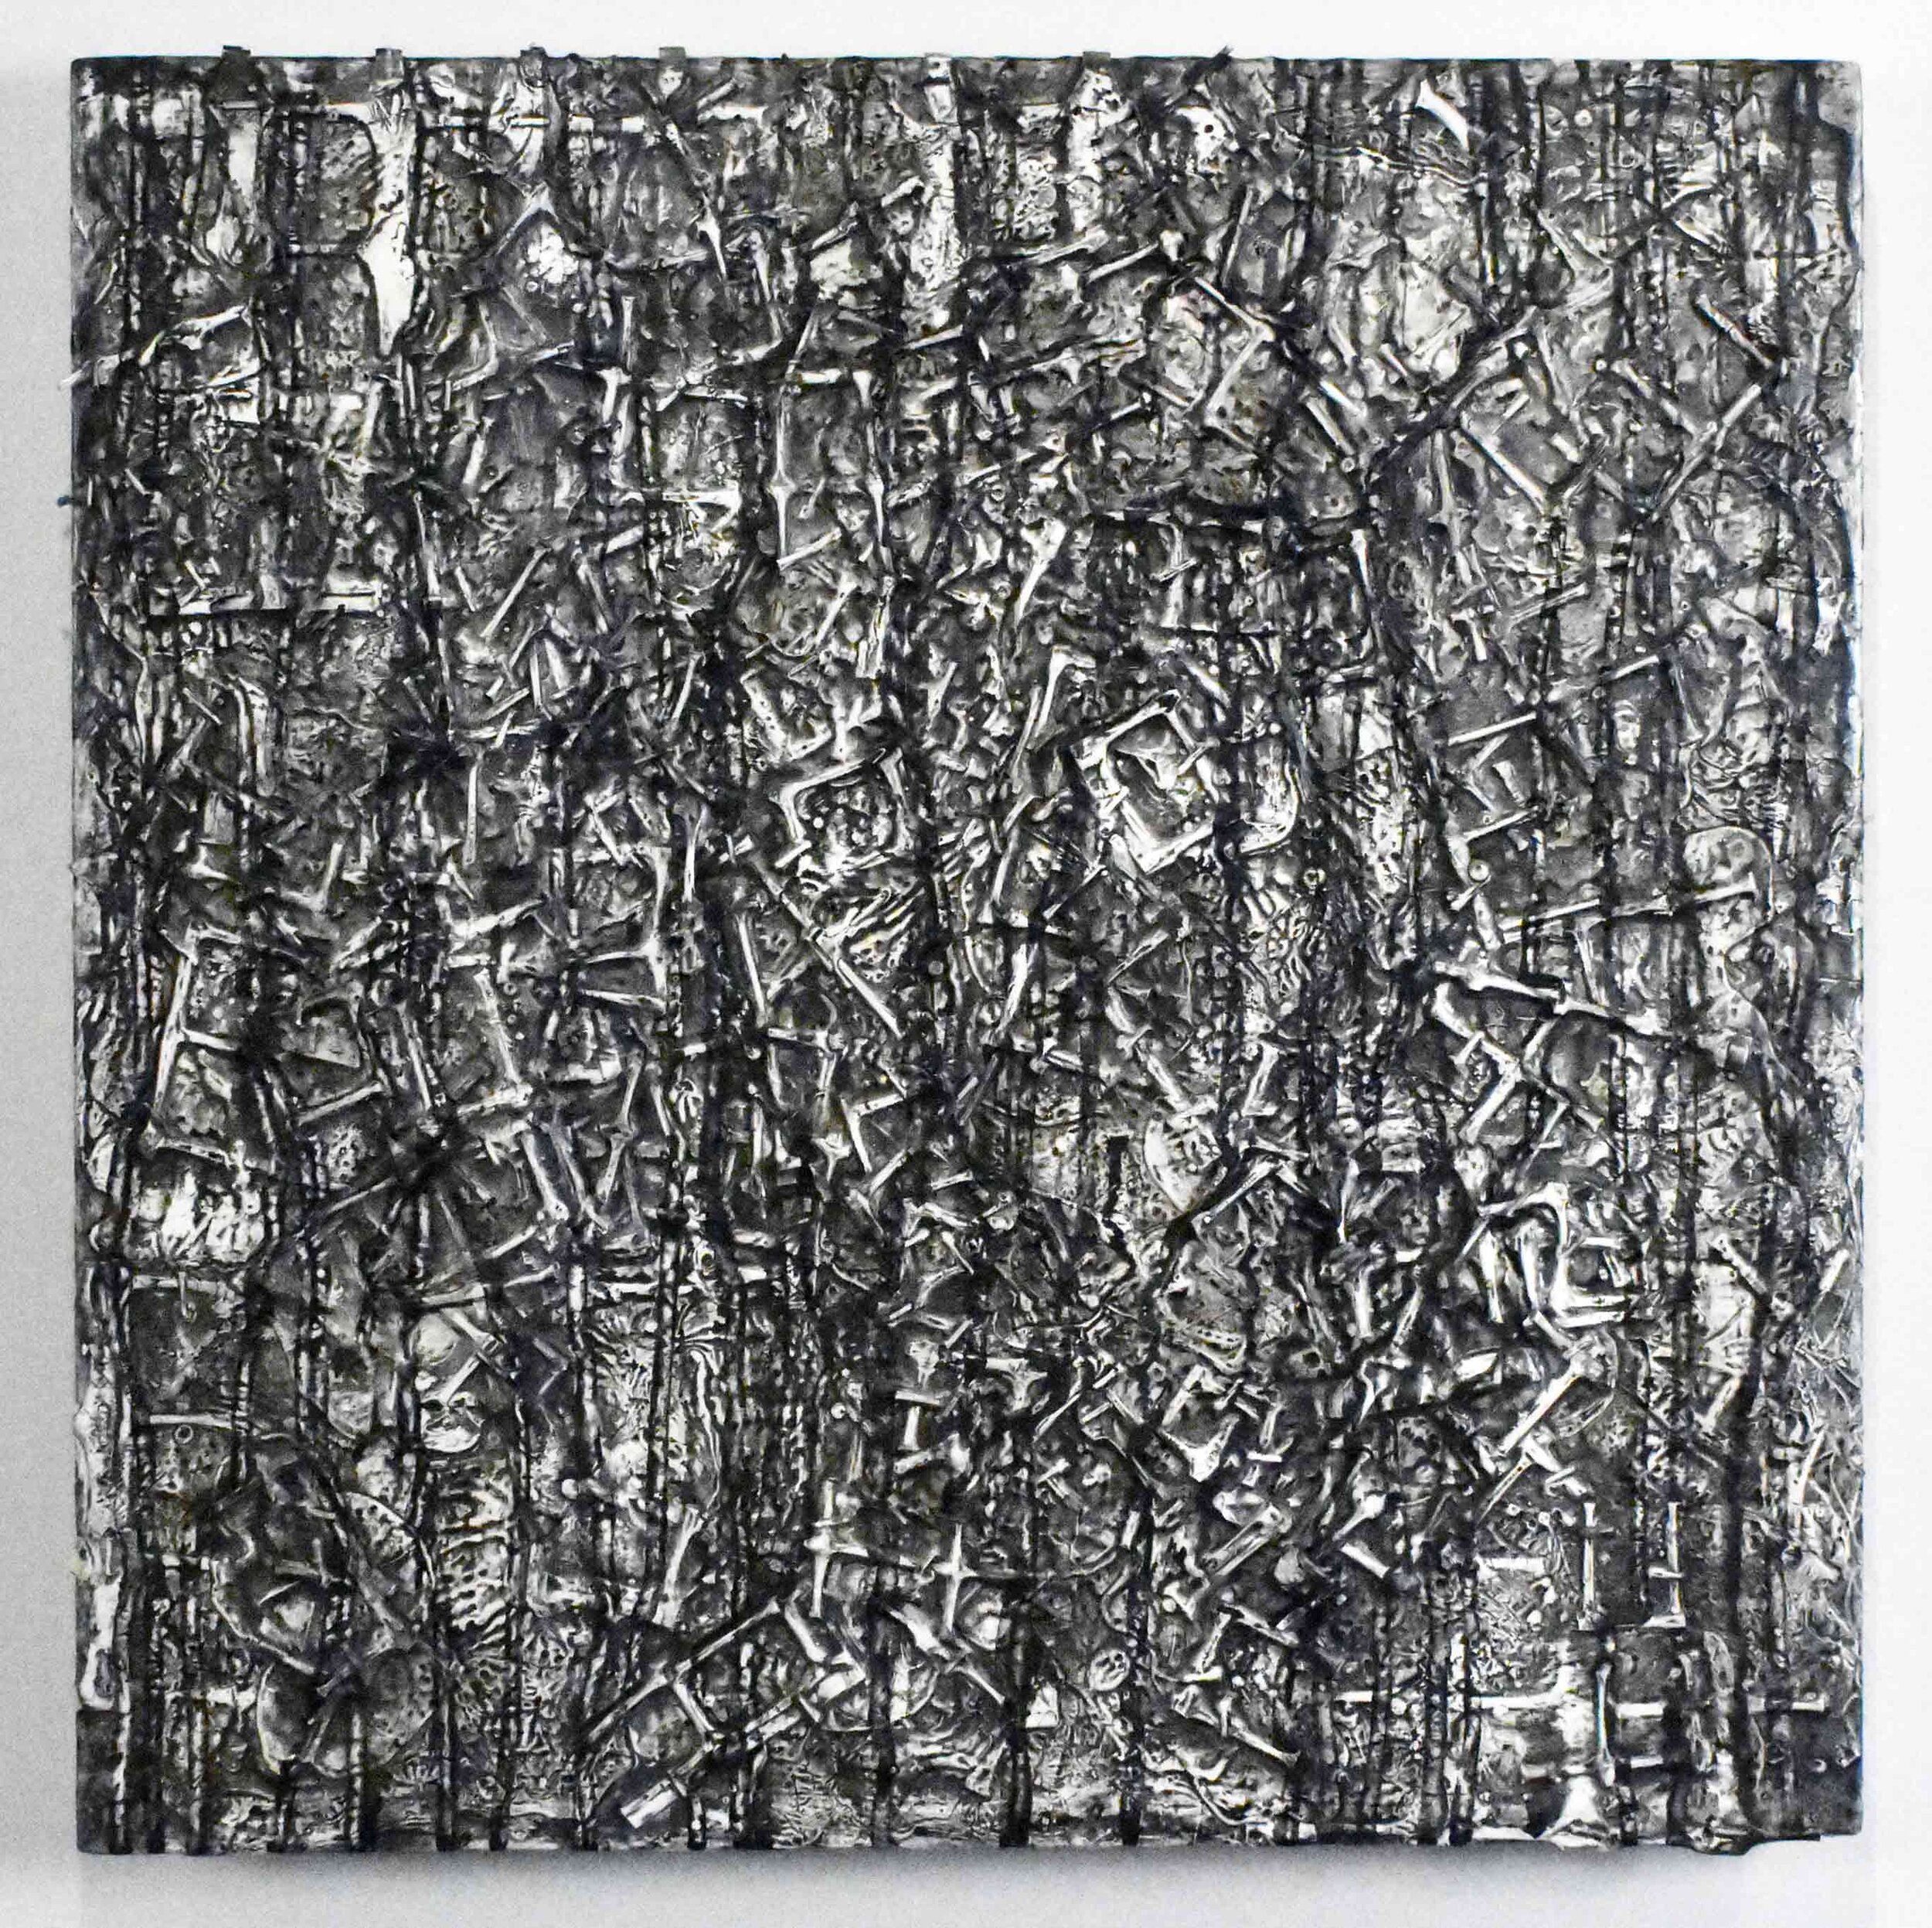   Disruption 2_Black and White   2020  wood, acrylic, clay  24 x 24” 